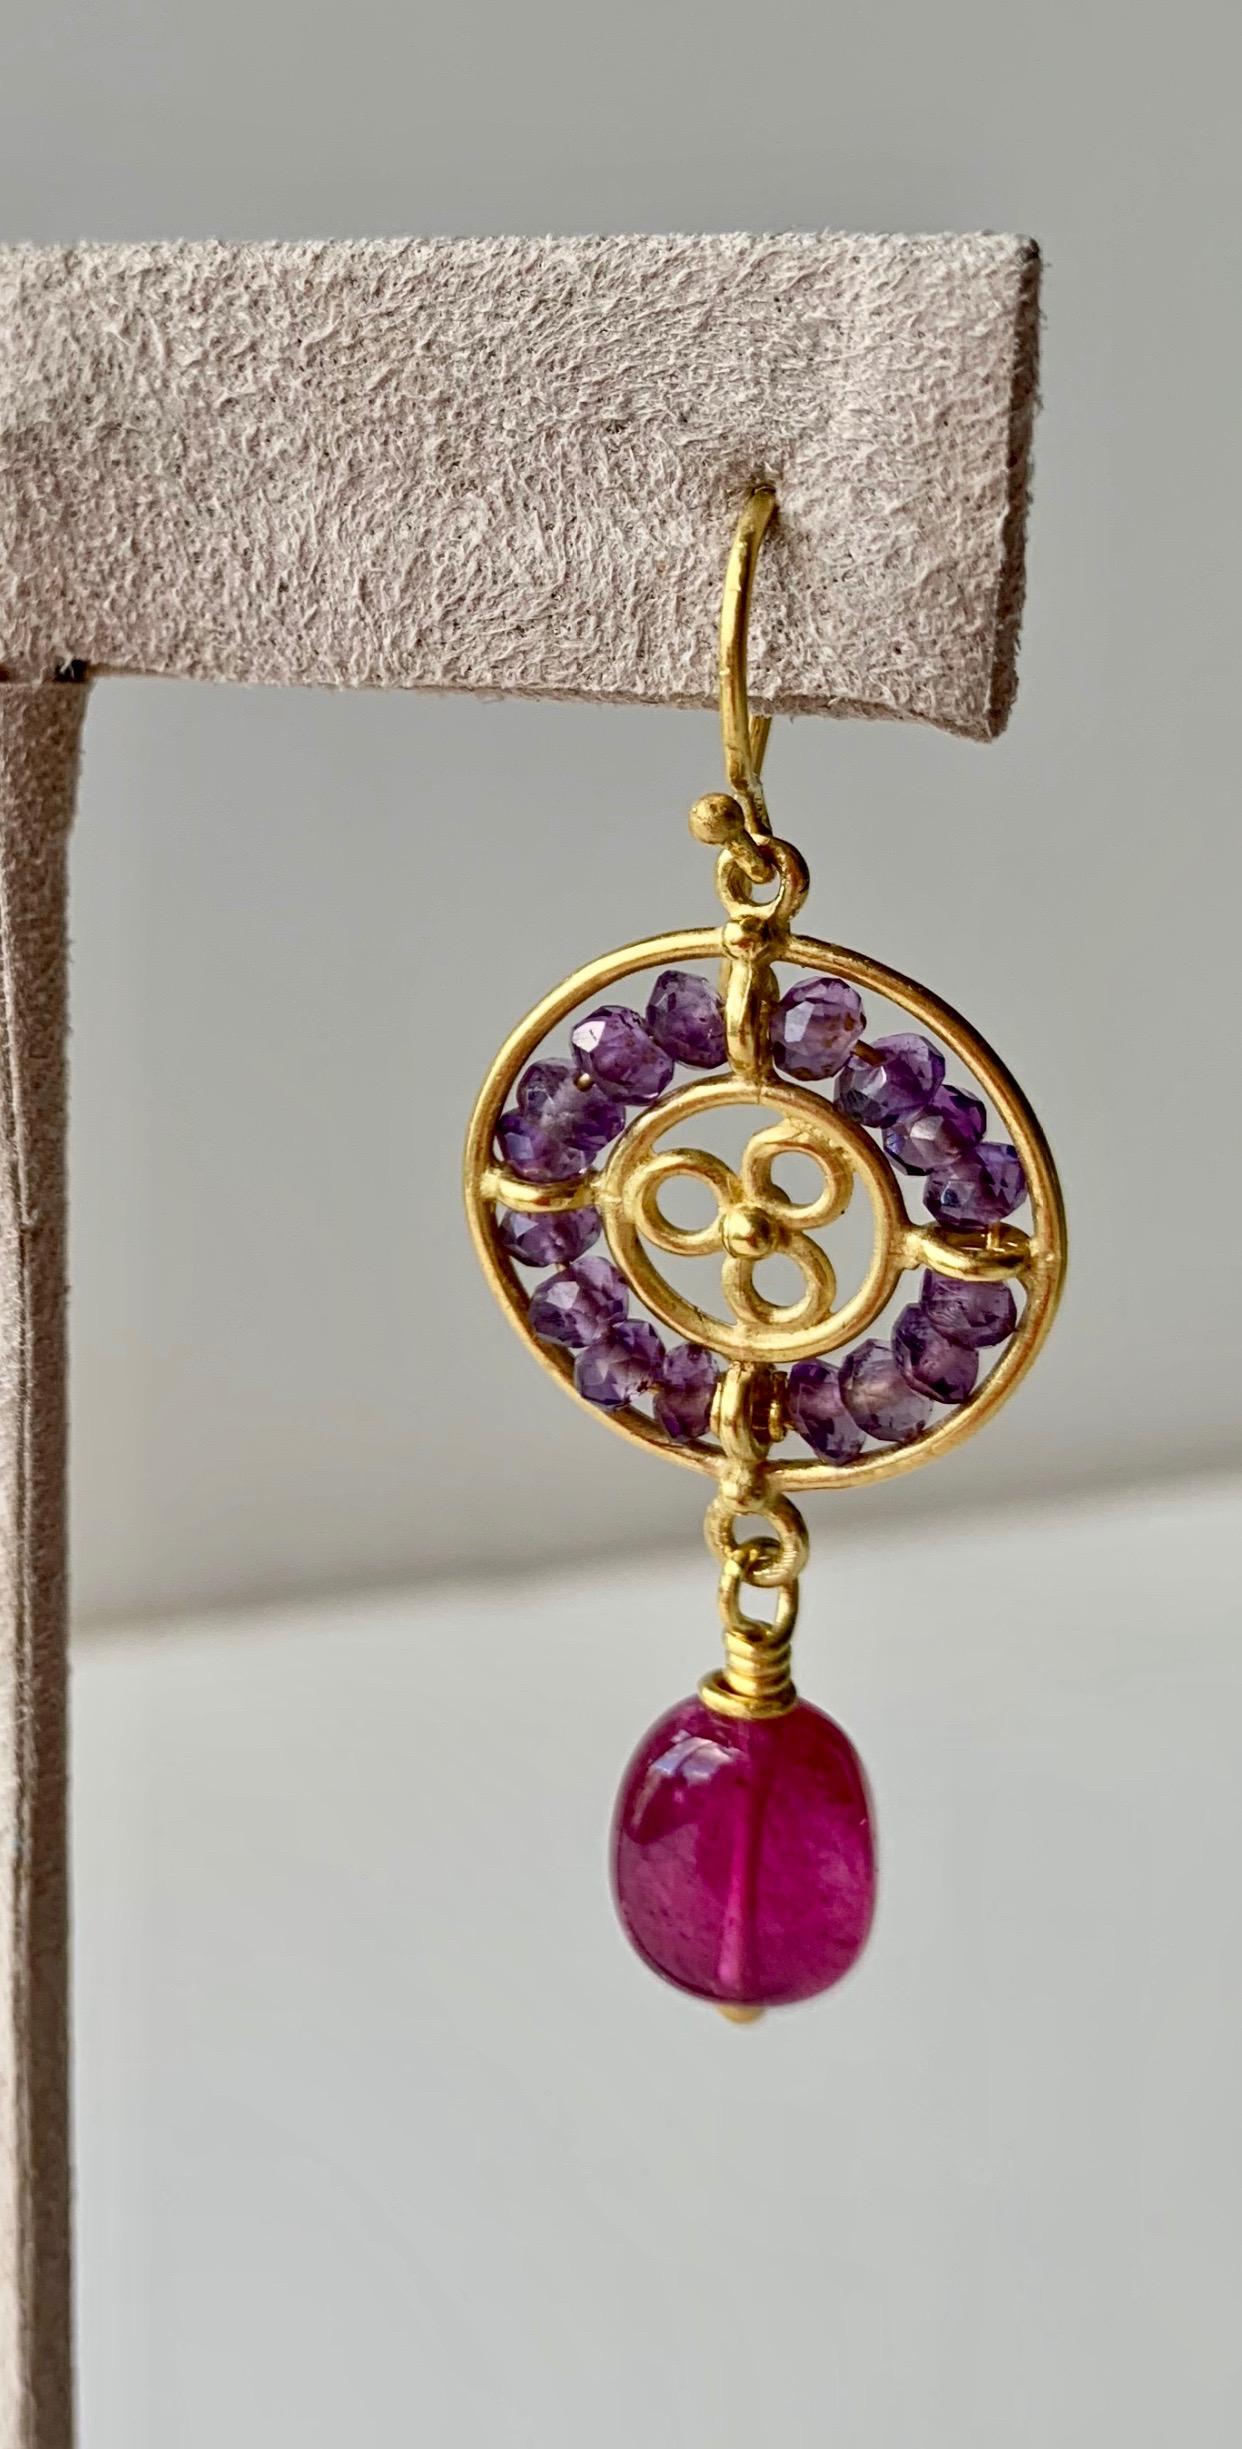 Handmade, ornate yet light, 20 karat gold open work earrings with amethyst beads and rubellite drop. Amethyst has been a prized gemstone over a millenia. Rubellite is a rare and vibrant stone  part of the tourmaline family and among it's most